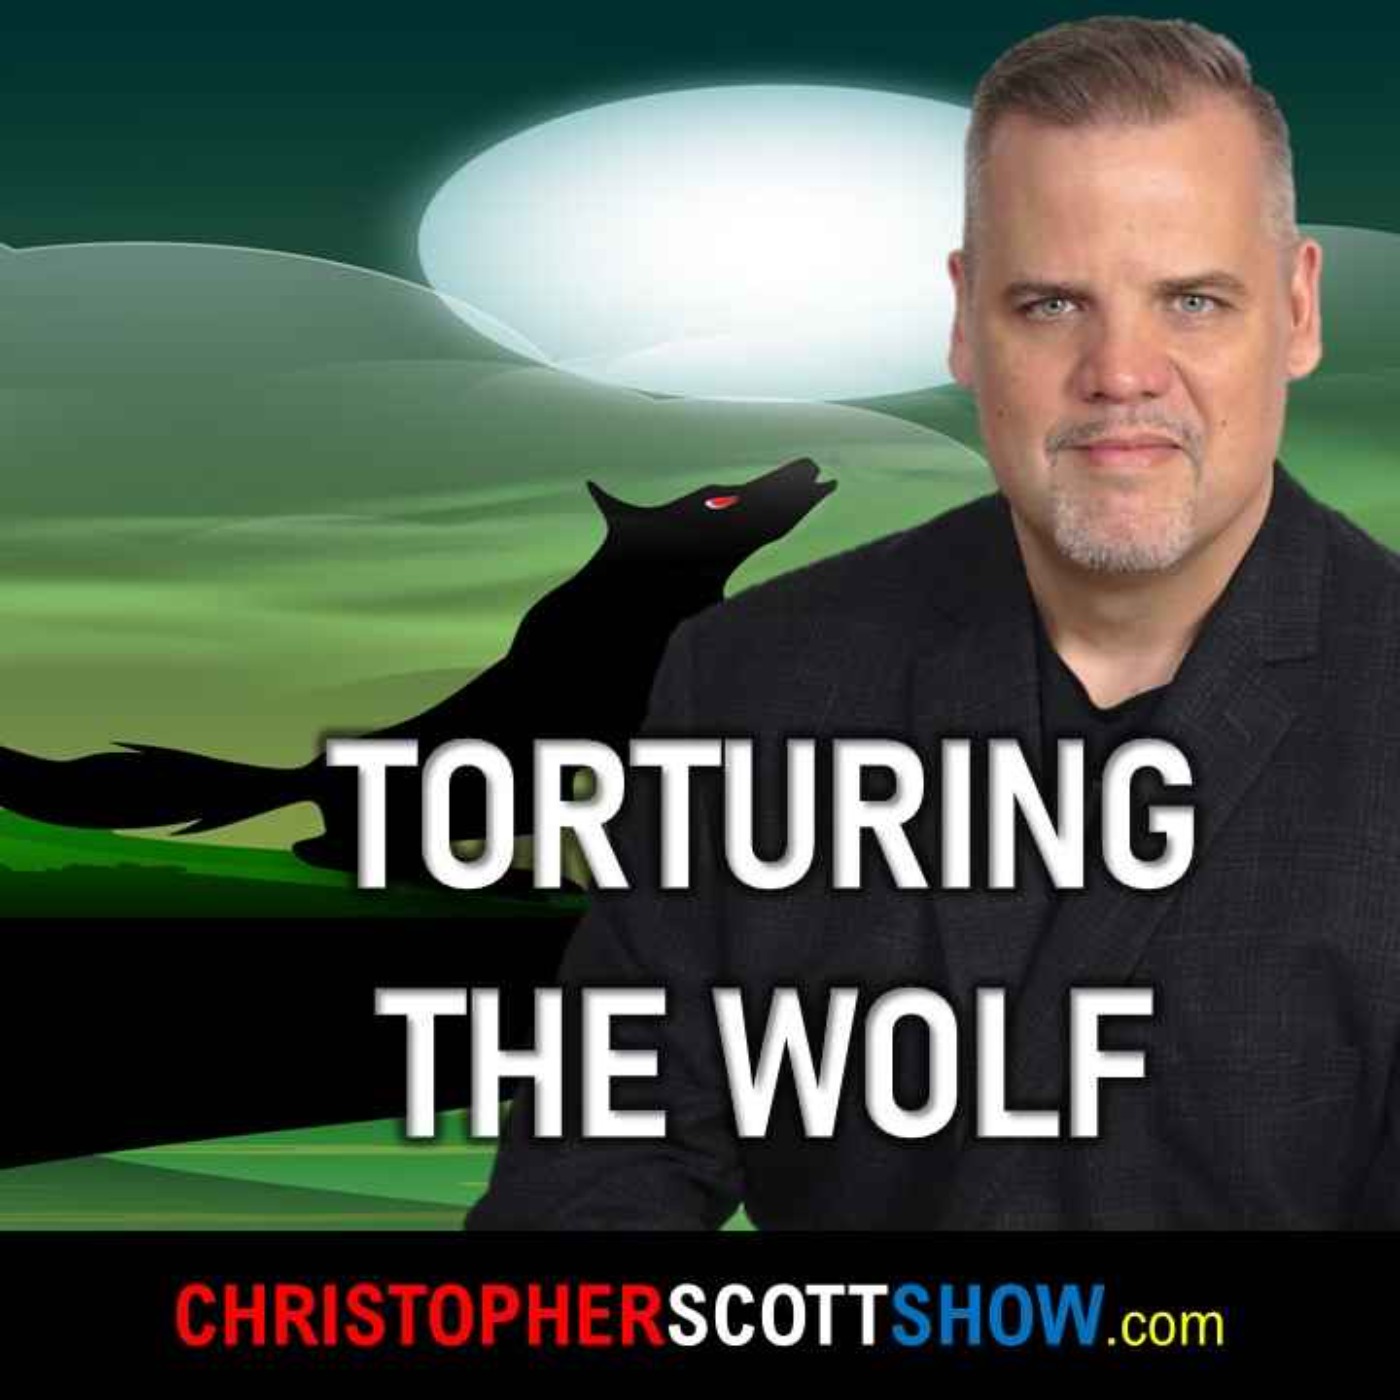 Torturing a Wolf An Ethical Examination